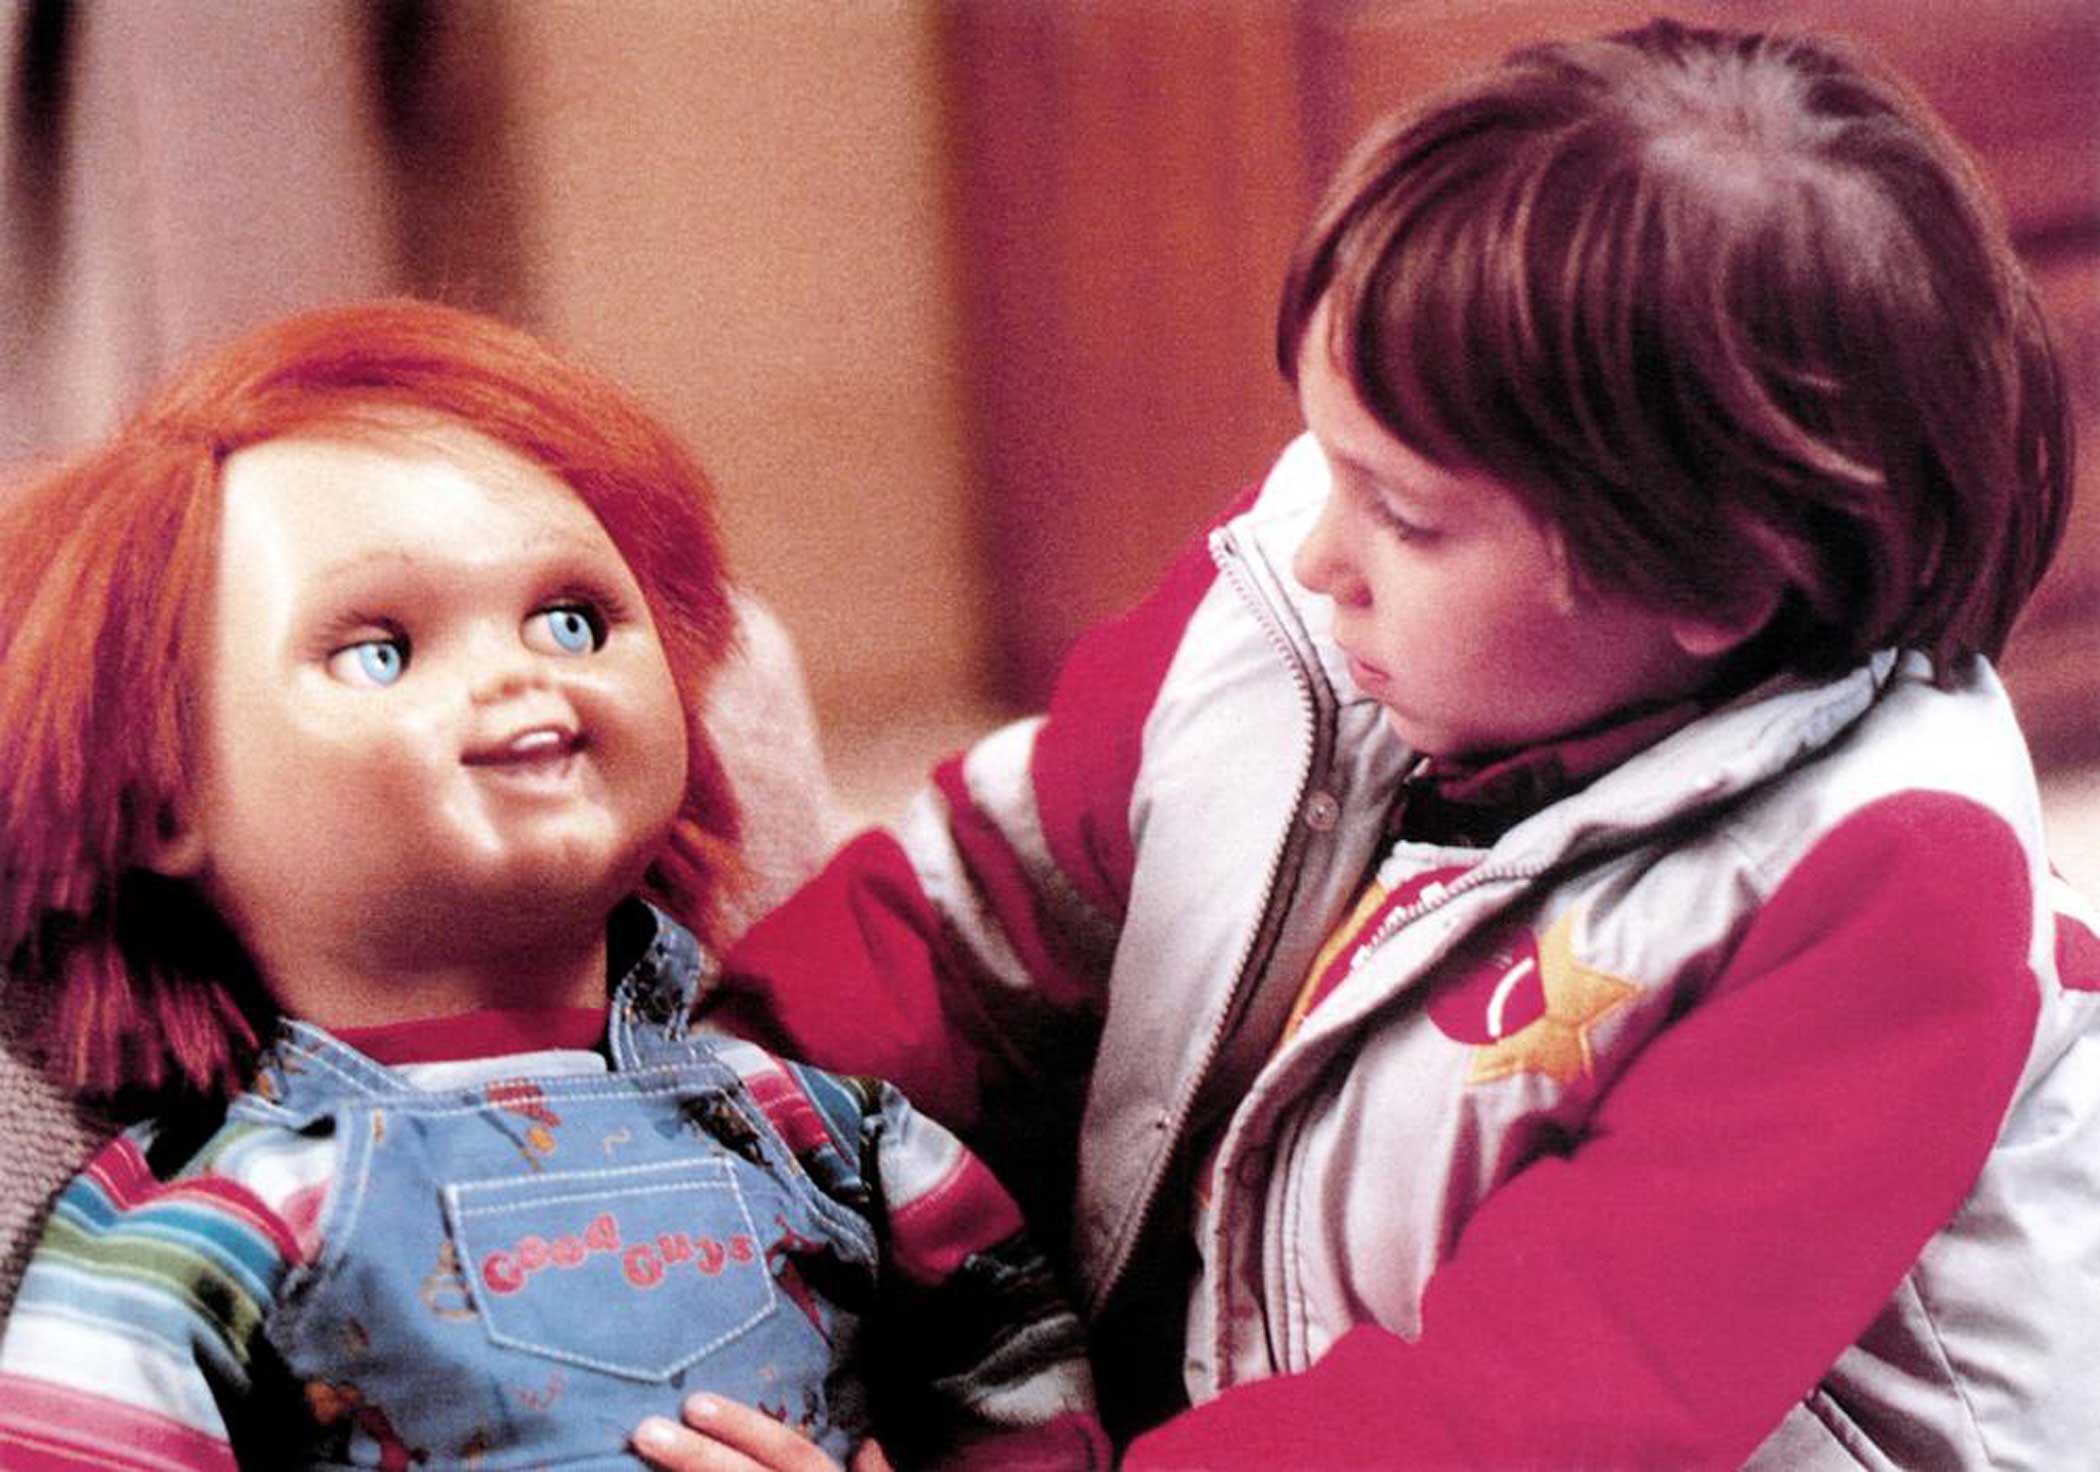 Alex Vincent as Andy Barclay with Chucky in <em>Child's Play</em> (United Artists)